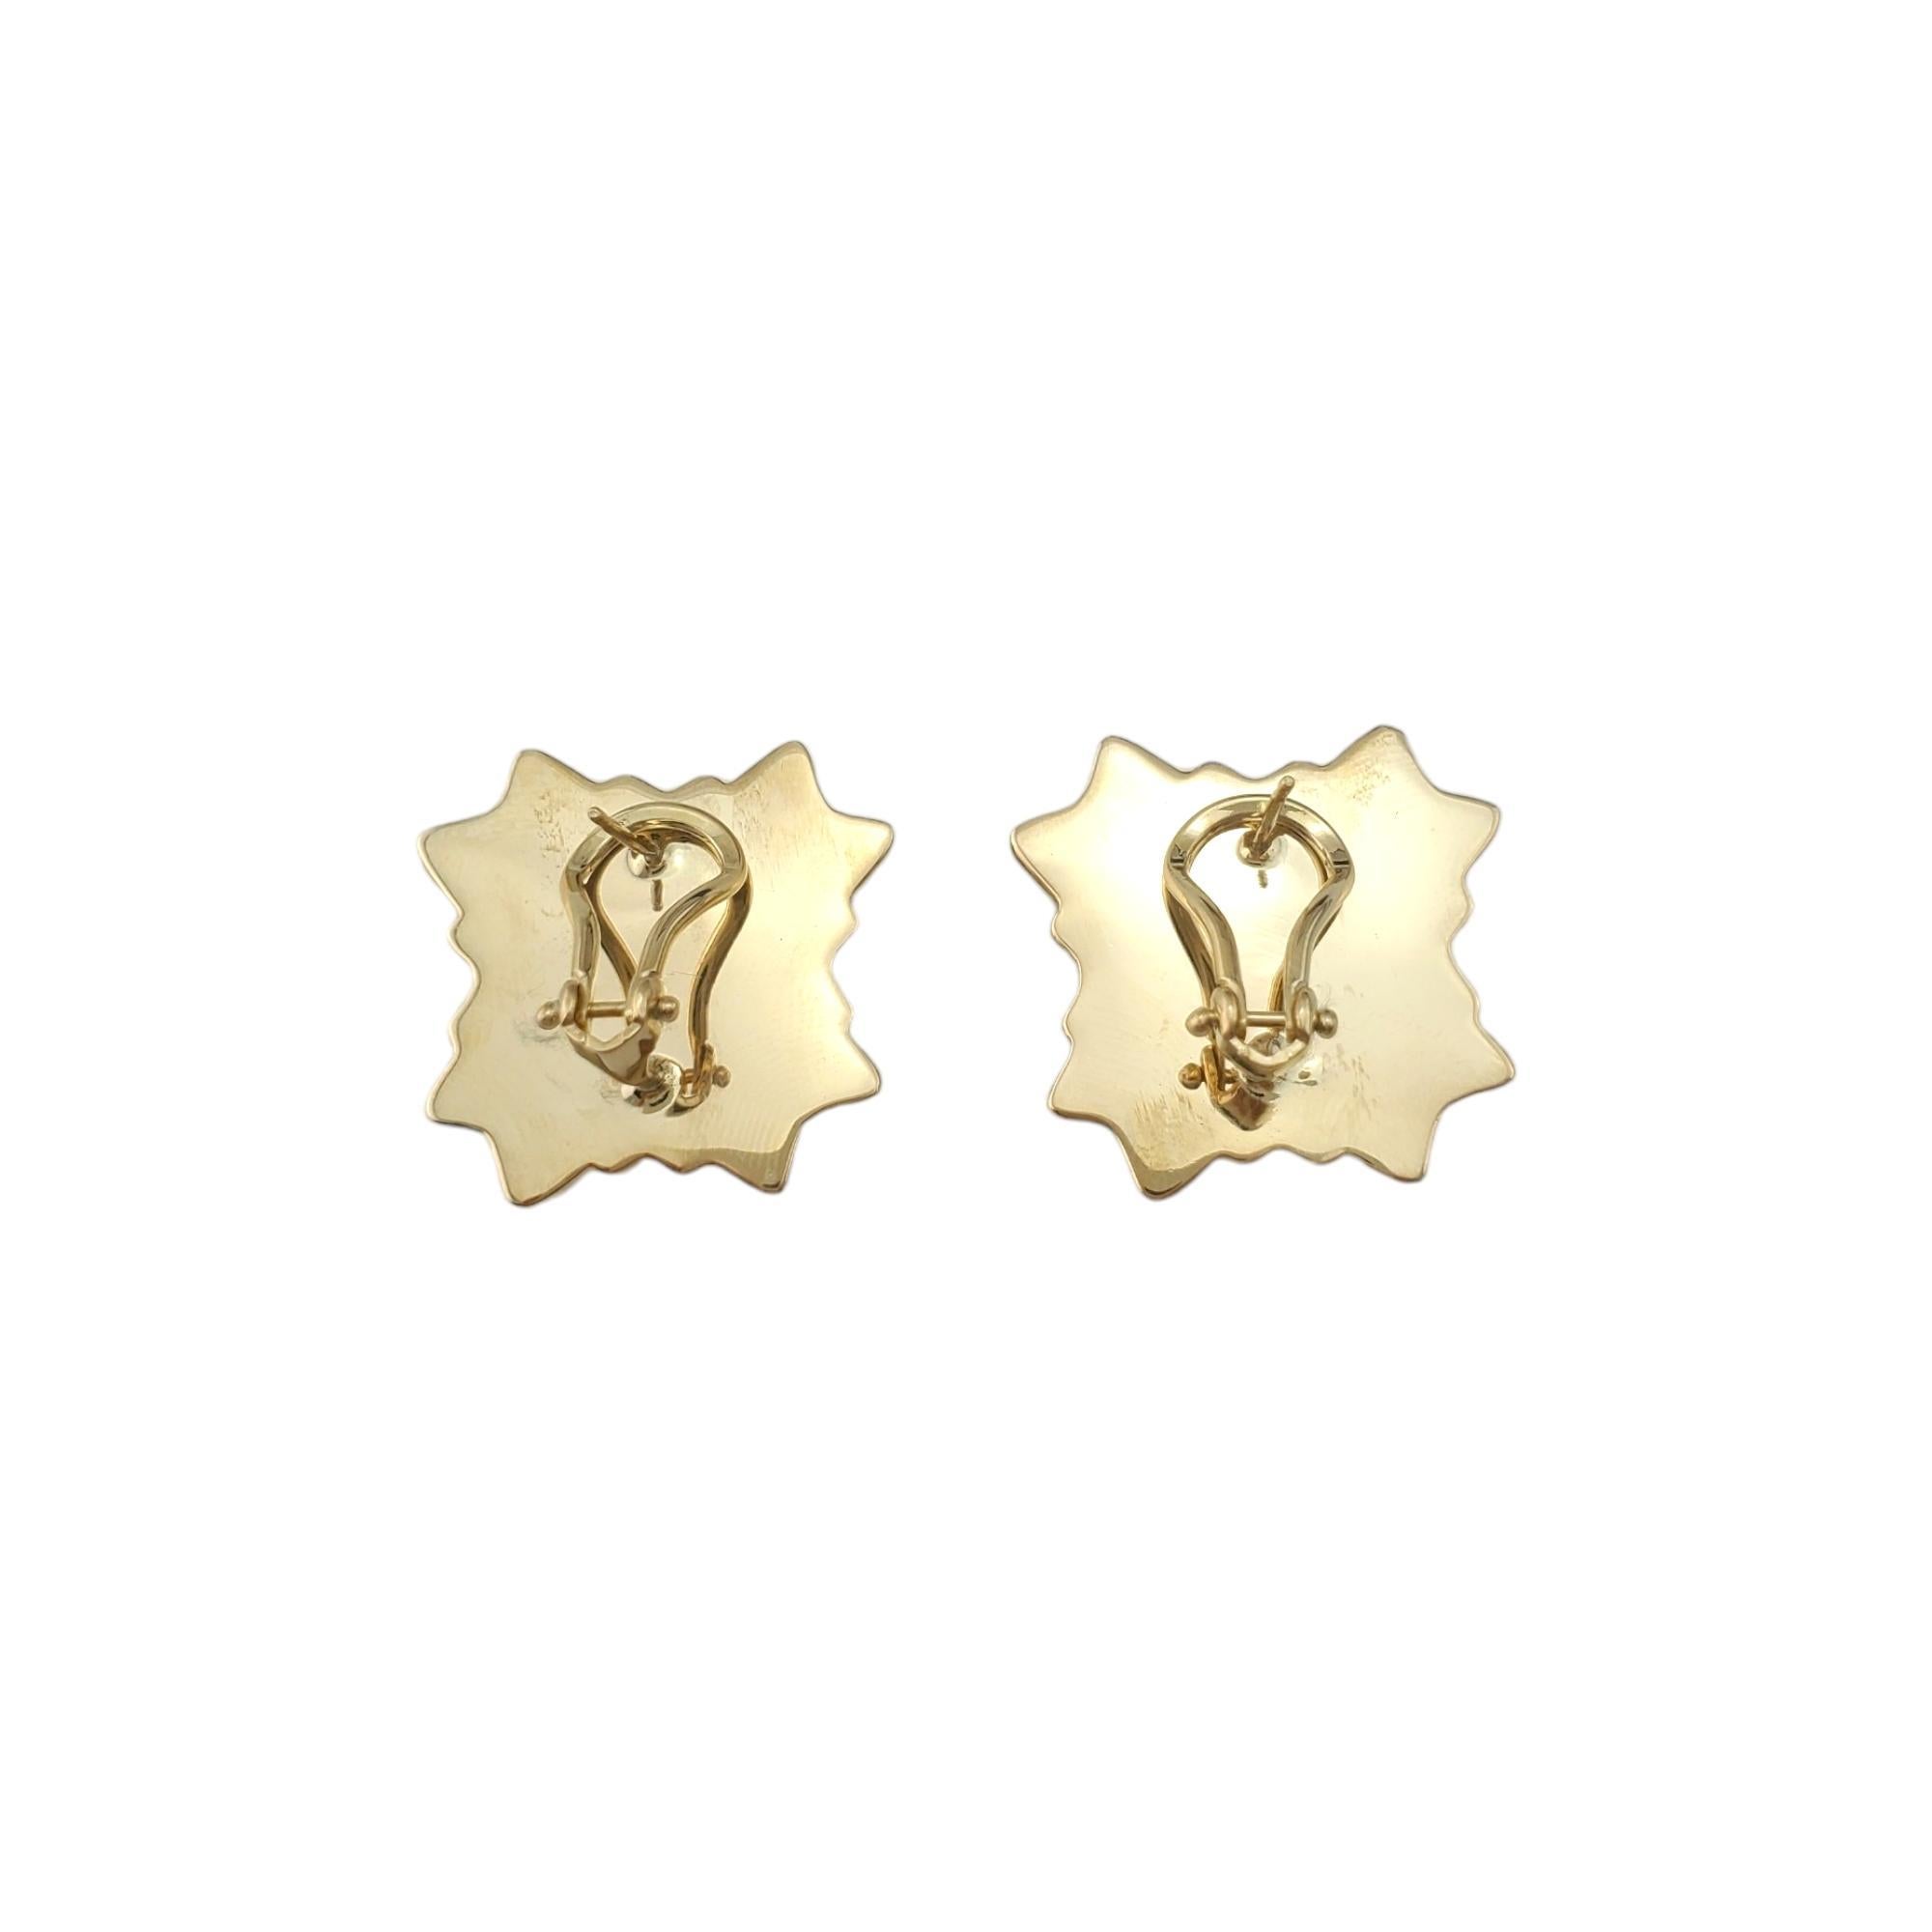 14K Yellow Gold Overlapping X Omega-Back Earrings

Elegant 14K yellow gold X earrings with omega-backs.

Hallmark: 14K

Weight: 8.6 g/ 5.5 dwt.

Size: 23.6 mm X 24.7 mm X 8.2 mm

Very good condition, professionally polished.

Will come packaged in a